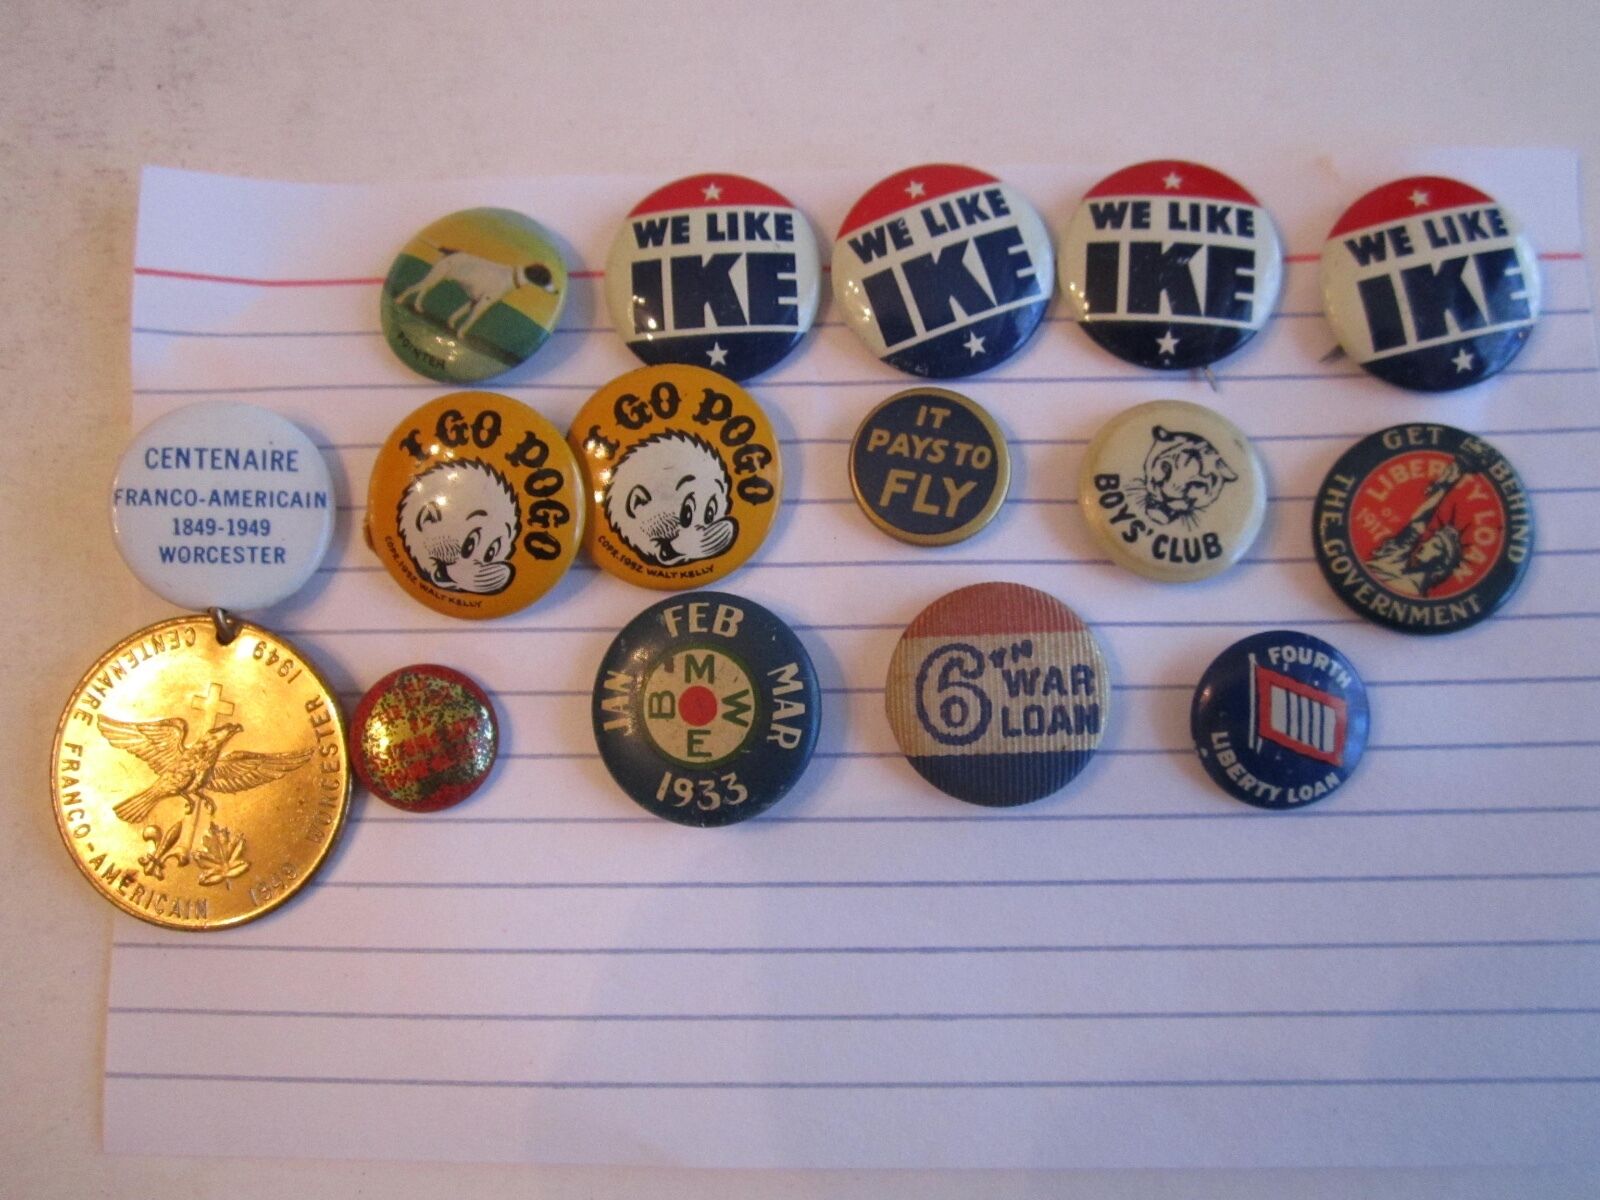 15 VINTAGE BUTTONS - IKE - WAR LOAN - BOY'S CLUB - POINTER DOG - & MORE - OFC-2